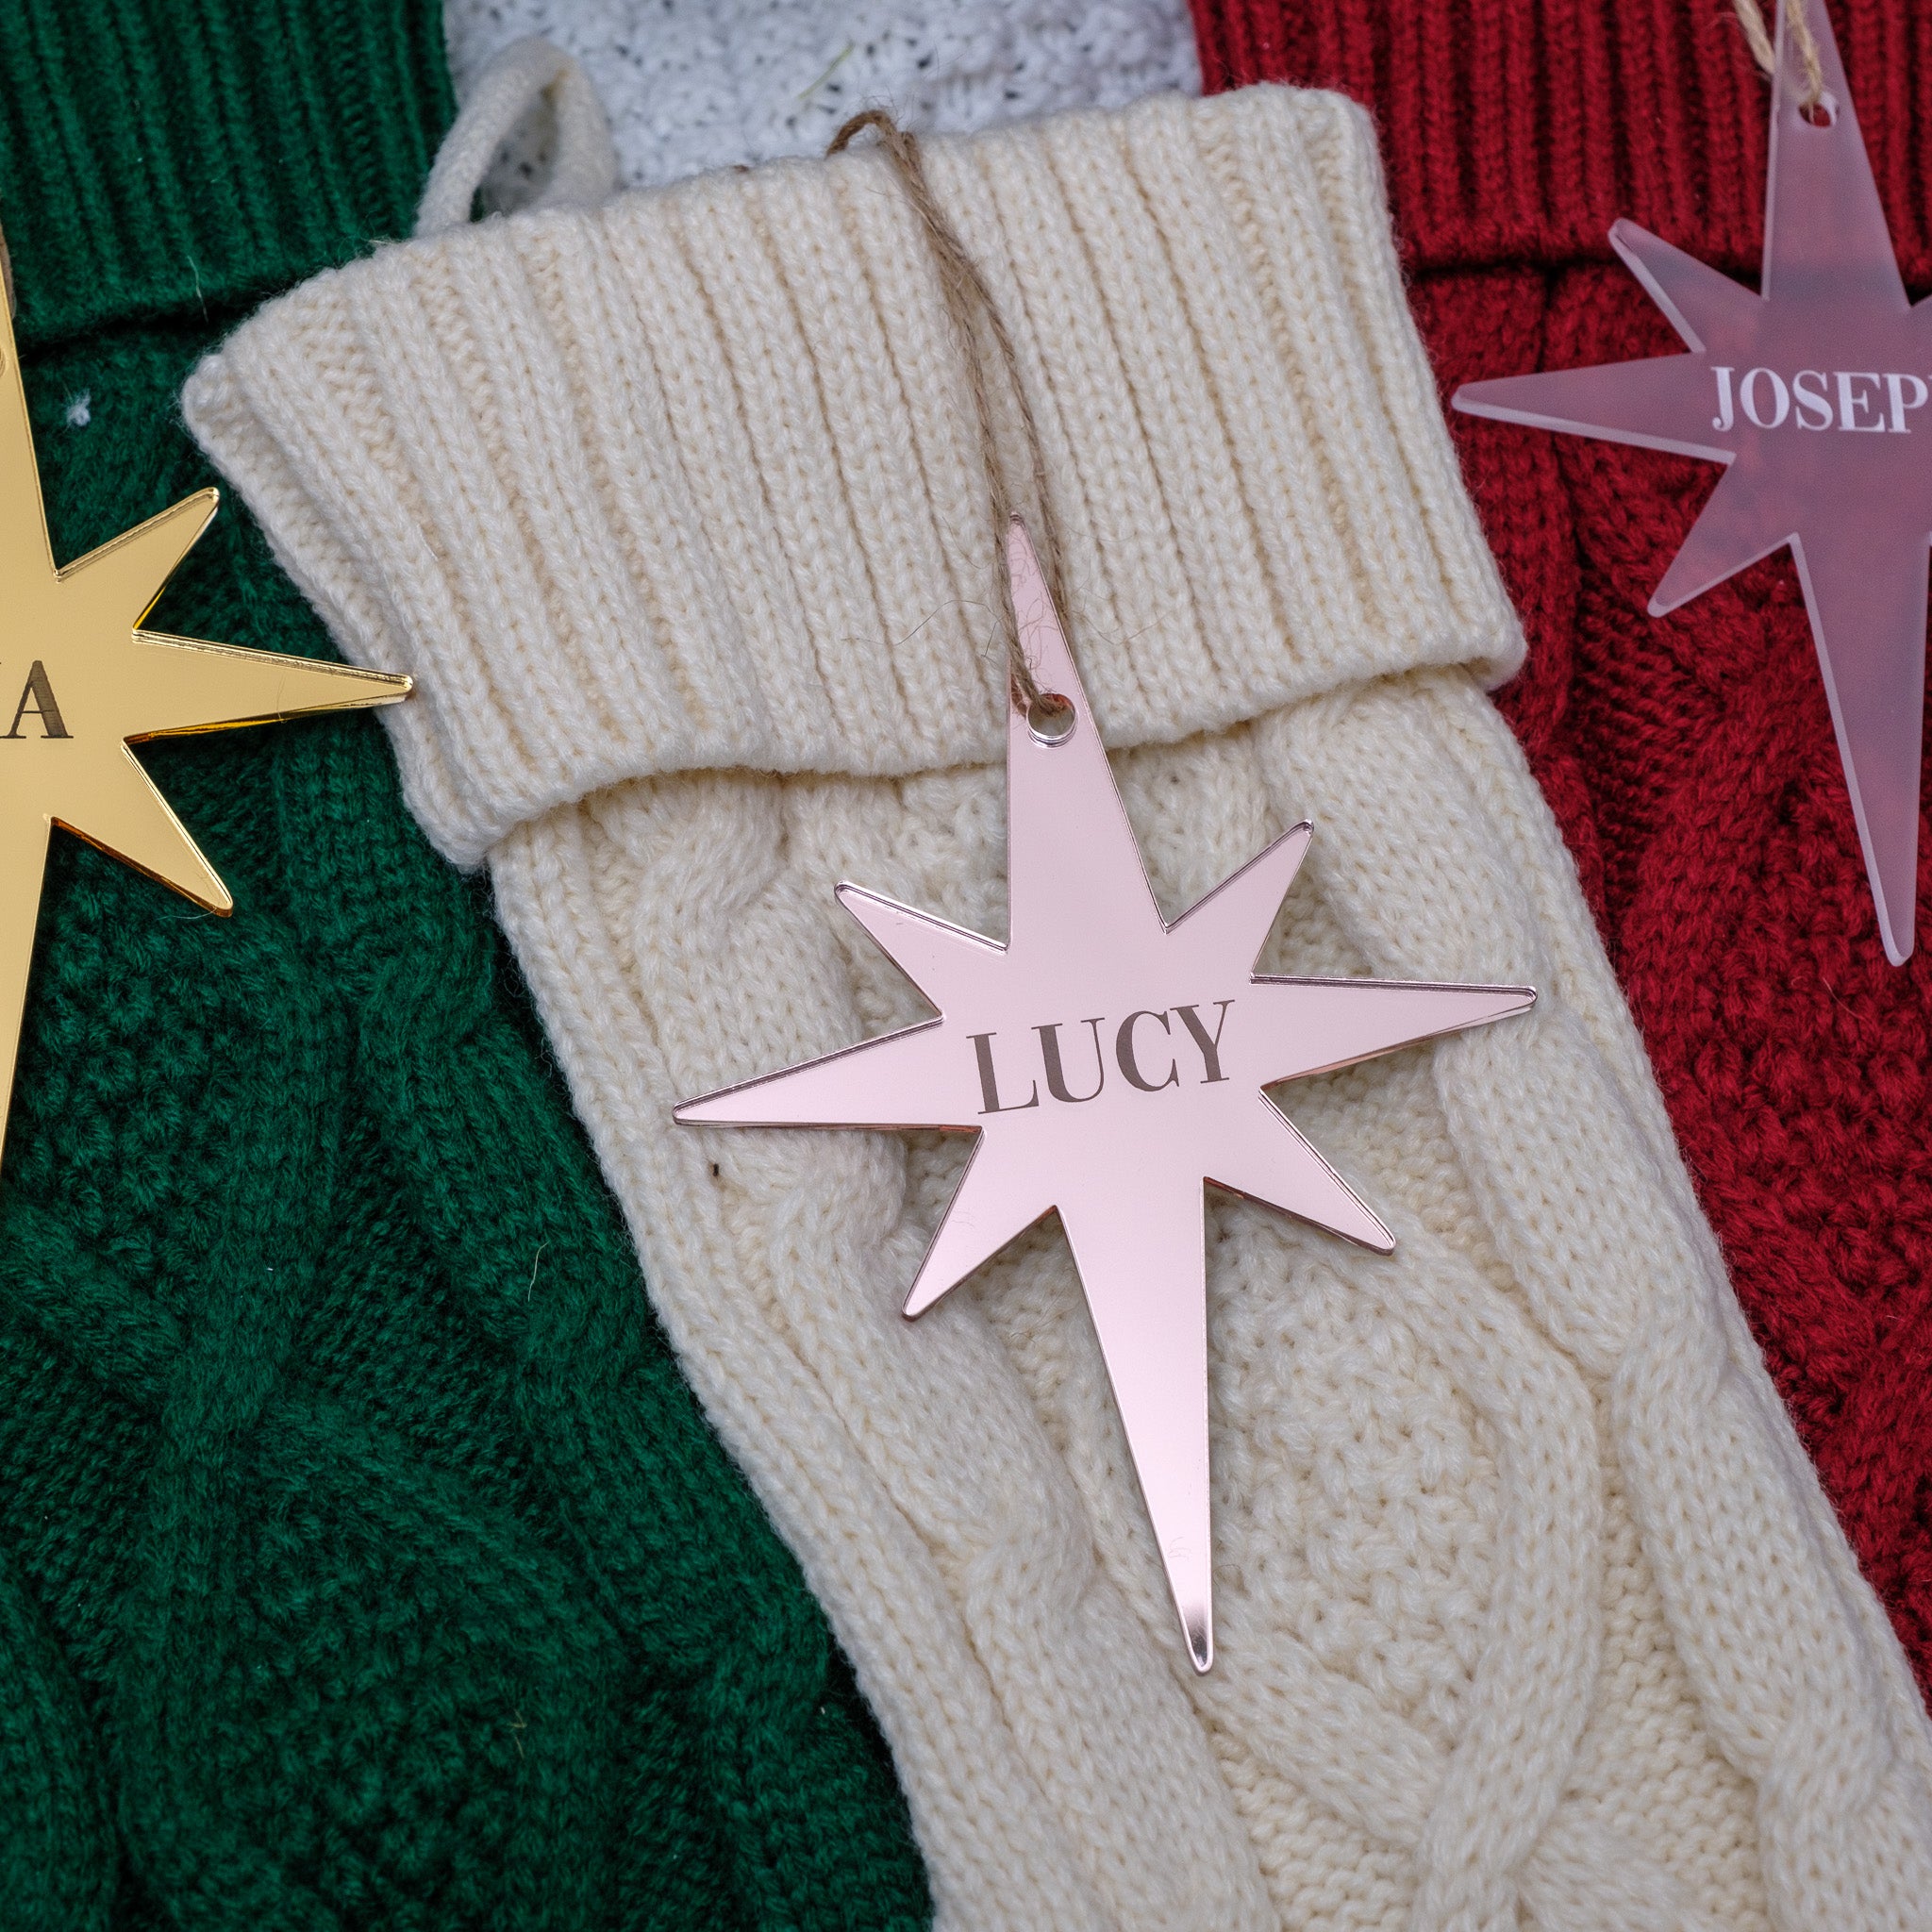 Personalized Christmas stockings